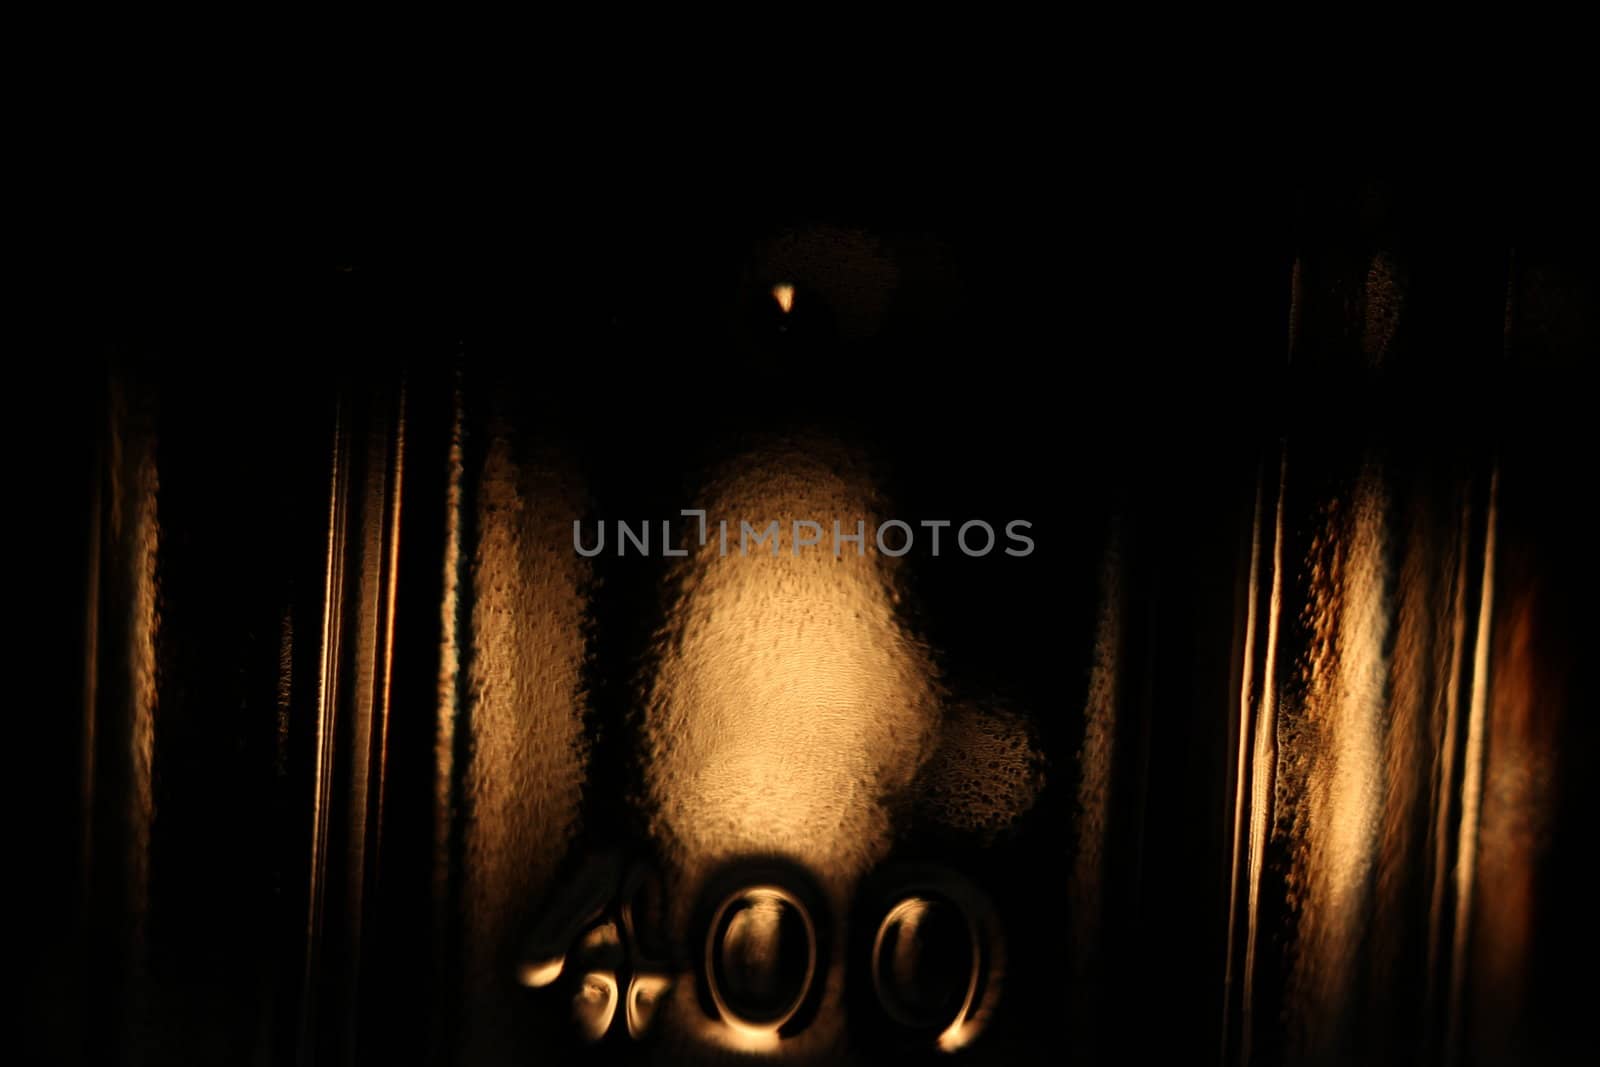 fine abstract image of glass bottle in the dark   